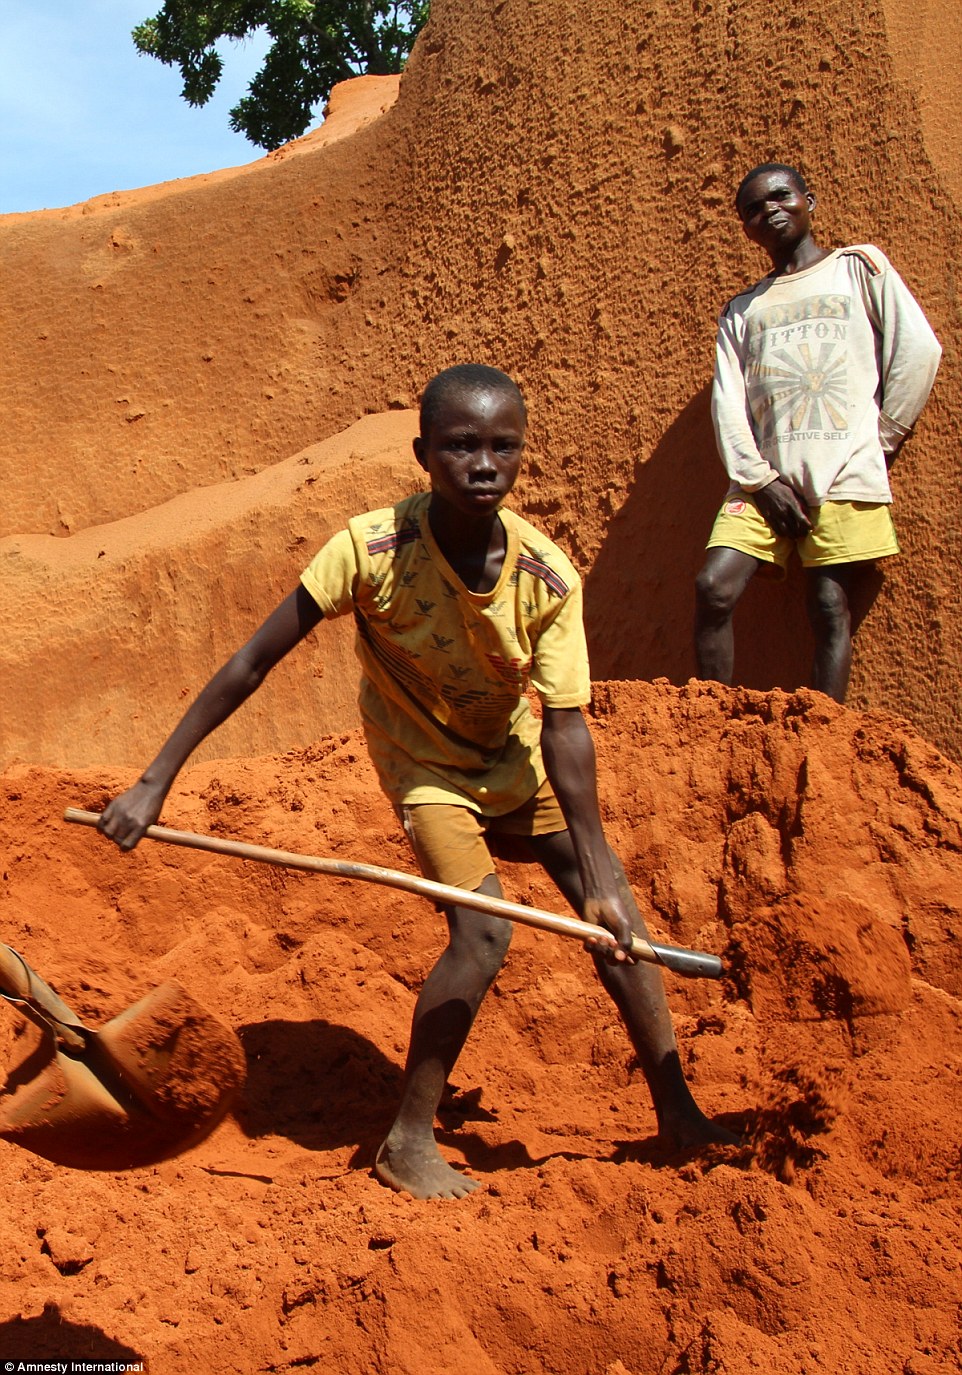 2CF963BA00000578-3256249-Slave_labour_An_11_year_old_boy_working_at_a_diamond_mine_in_the-a-109_1443708626800.jpg